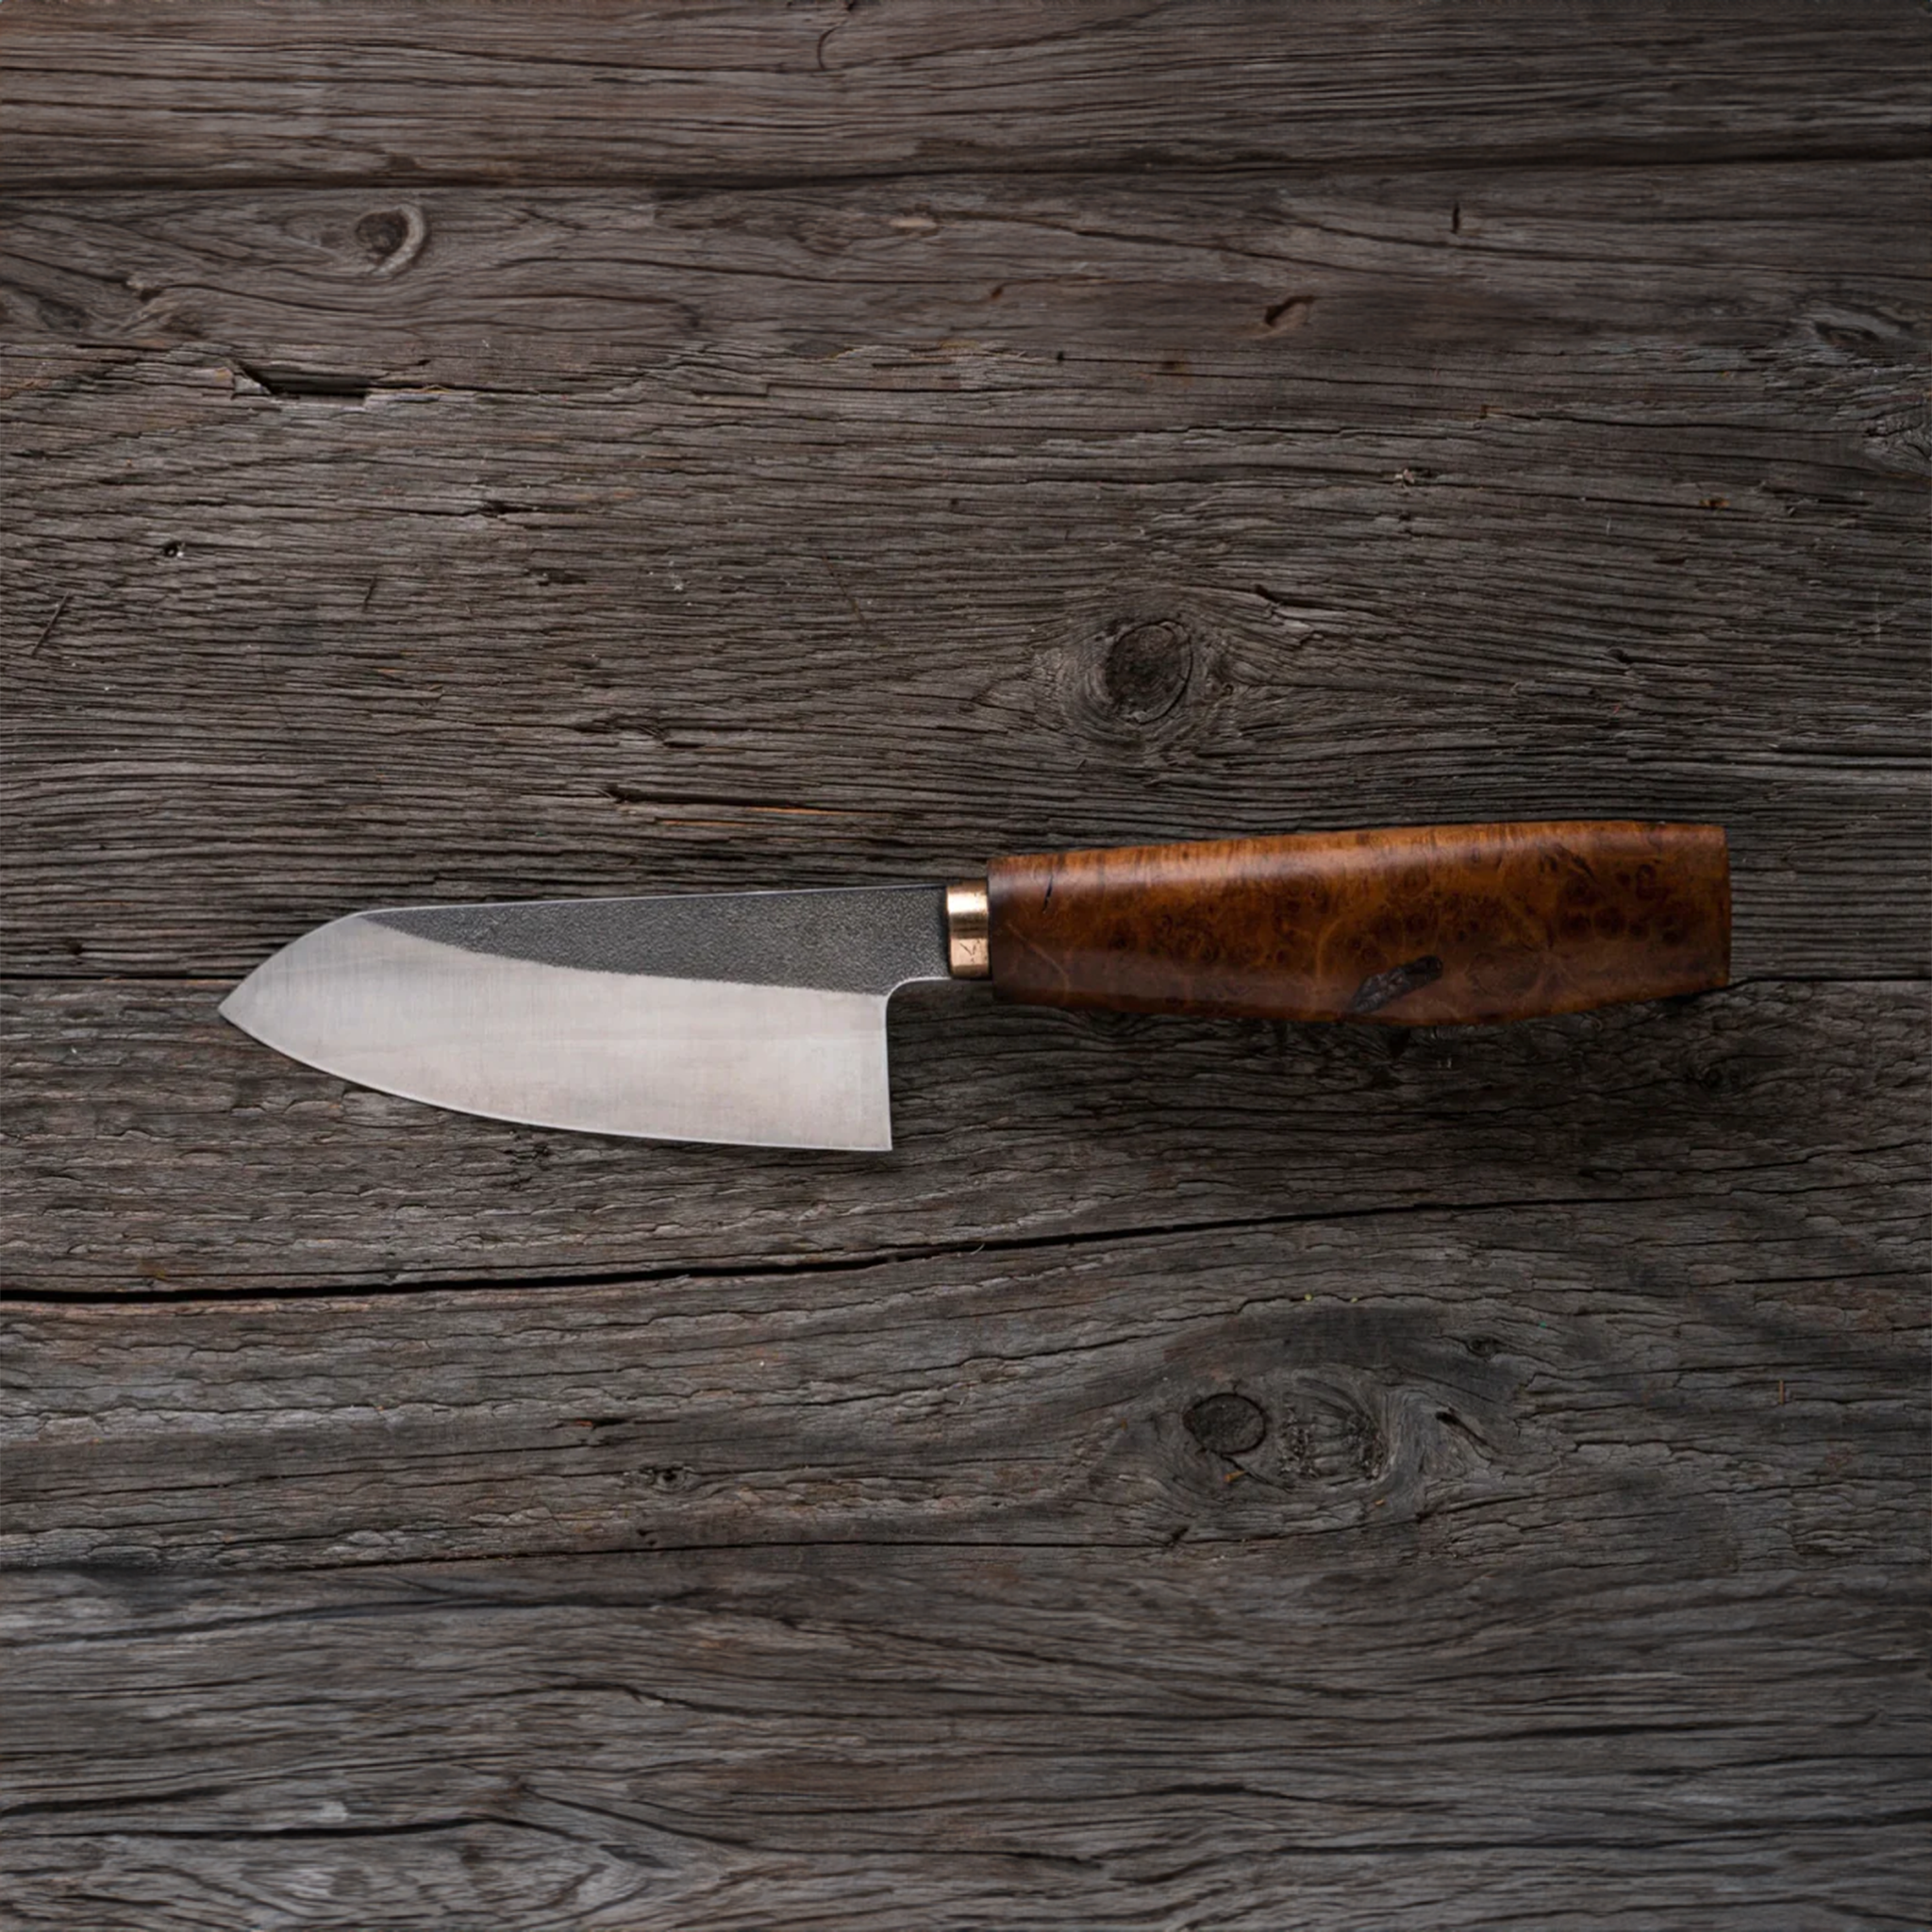 a knife with a wooden handle on a wooden table